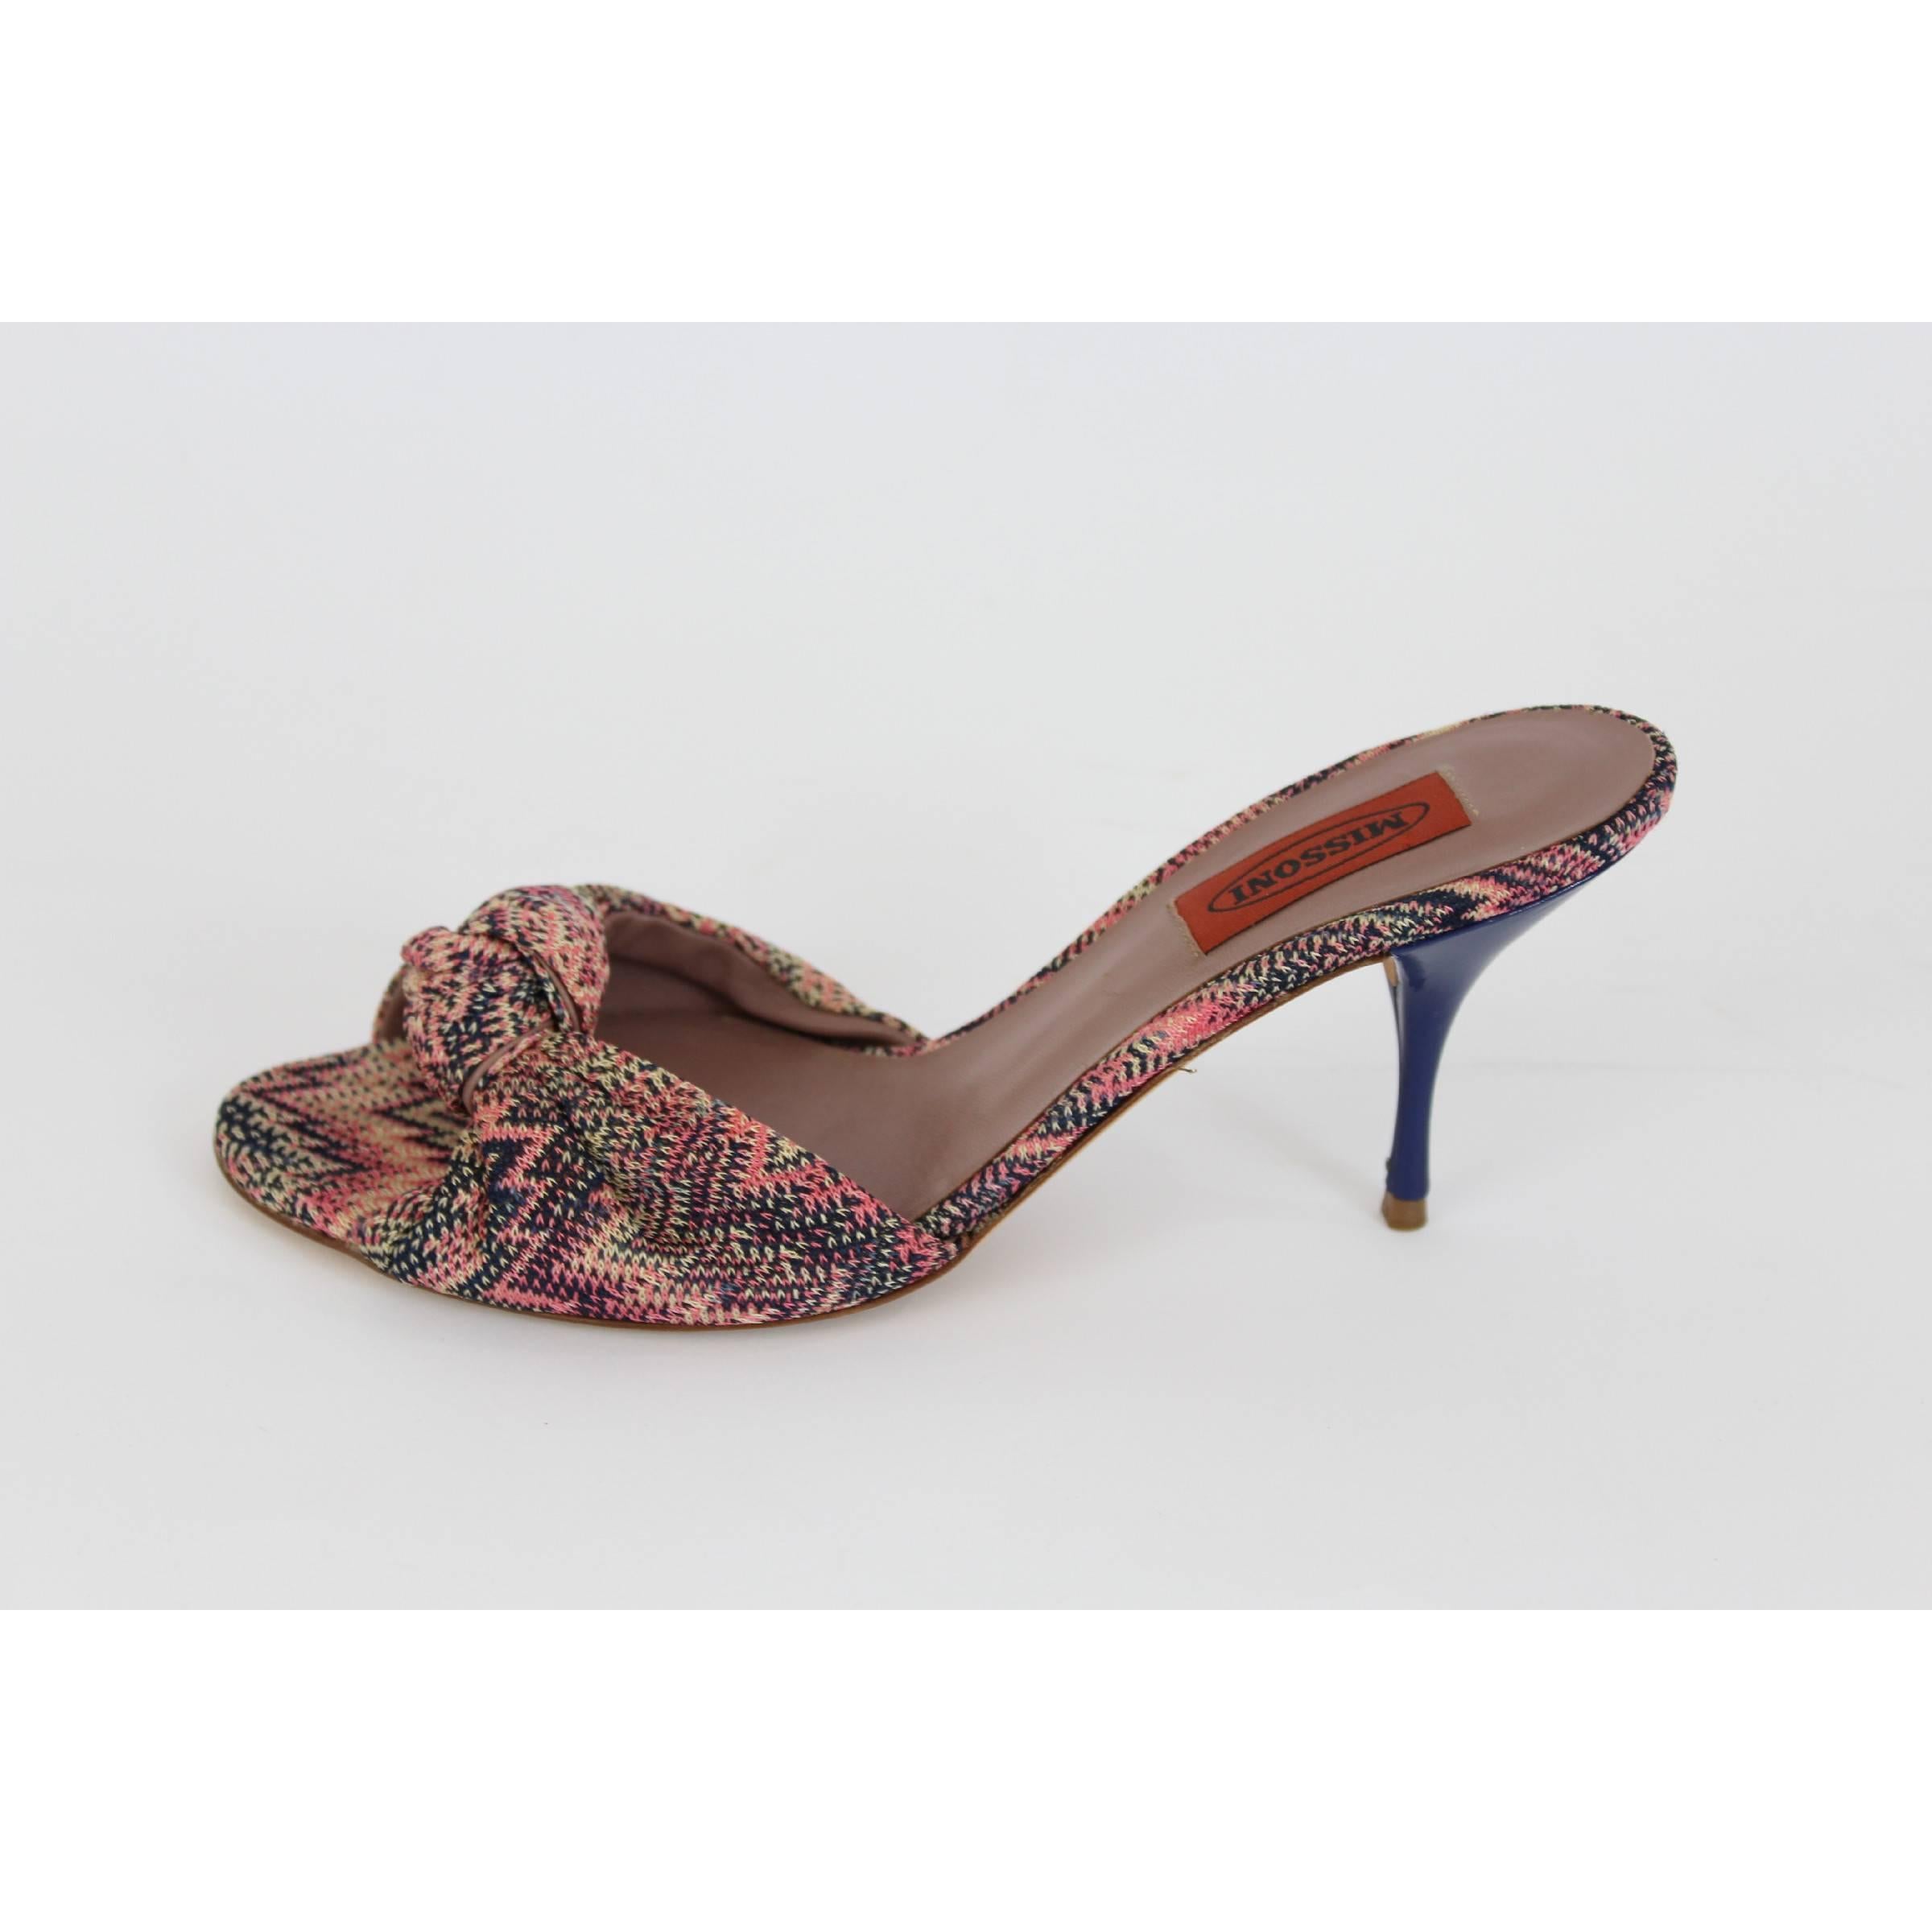 Missoni shoes with pink fabric and leather. Crochet fabric sole and insole in leather. Model sandal popped with stiletto heel. Made in Italy. Excellent vintage conditions.

Size: 39 it 8 1/2 Us 6 Uk

Heel height: 7 cm
Pink color
Composition: canvas